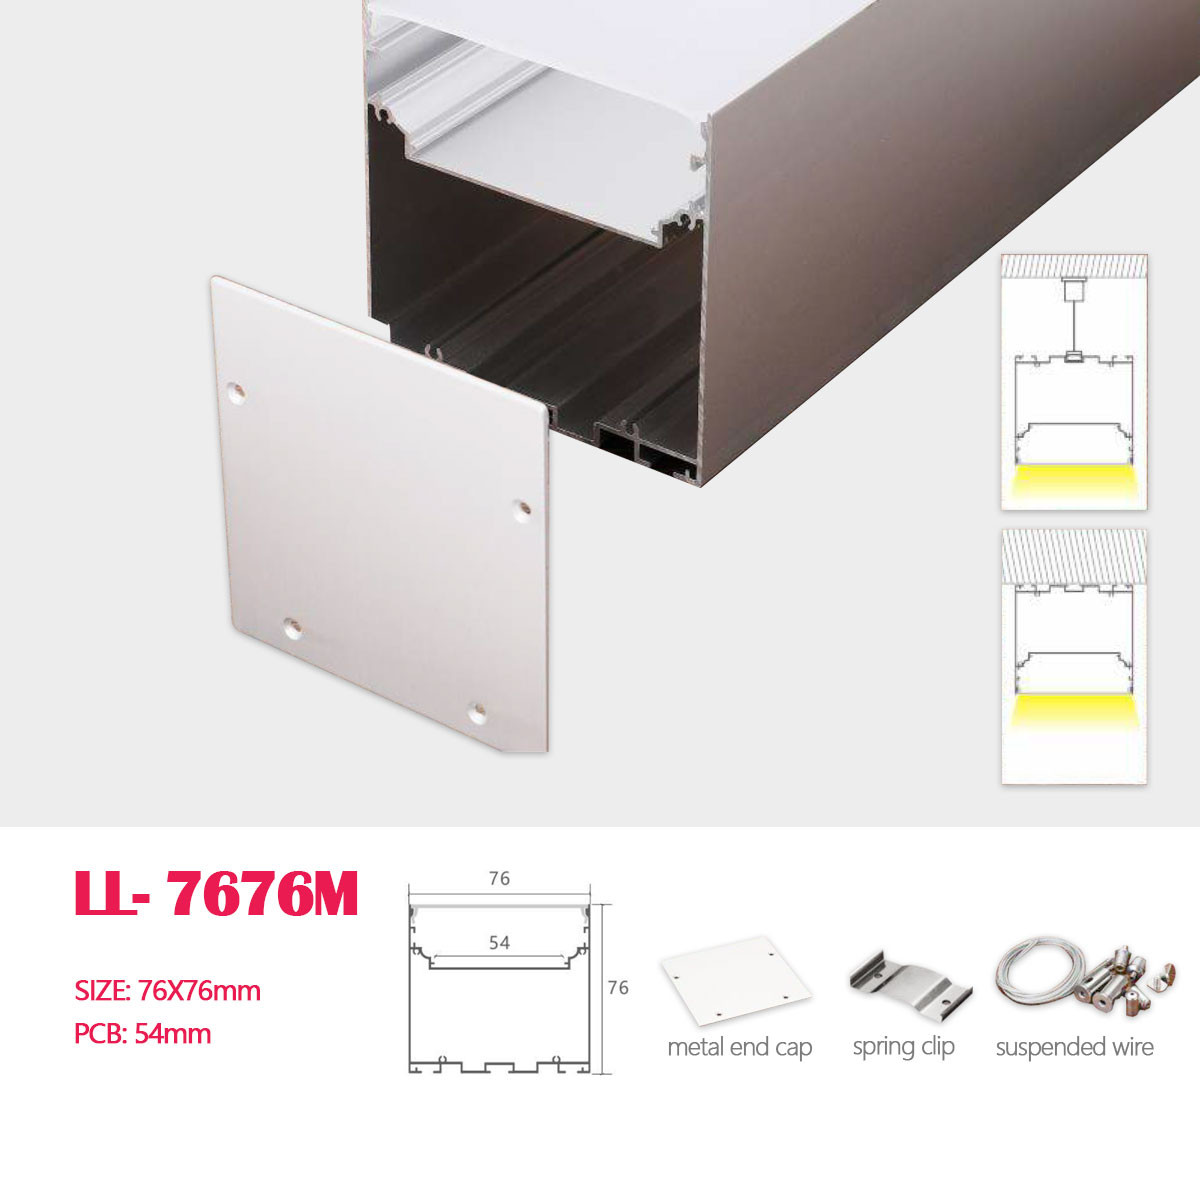 1M (3.28FT)76MM*76MM Square Double-layer Aluminum Profile with Flat PC cover and Suspension wire, Suspended Mounting with Pendant Hardware for Hanging or Surface mounted Lighting